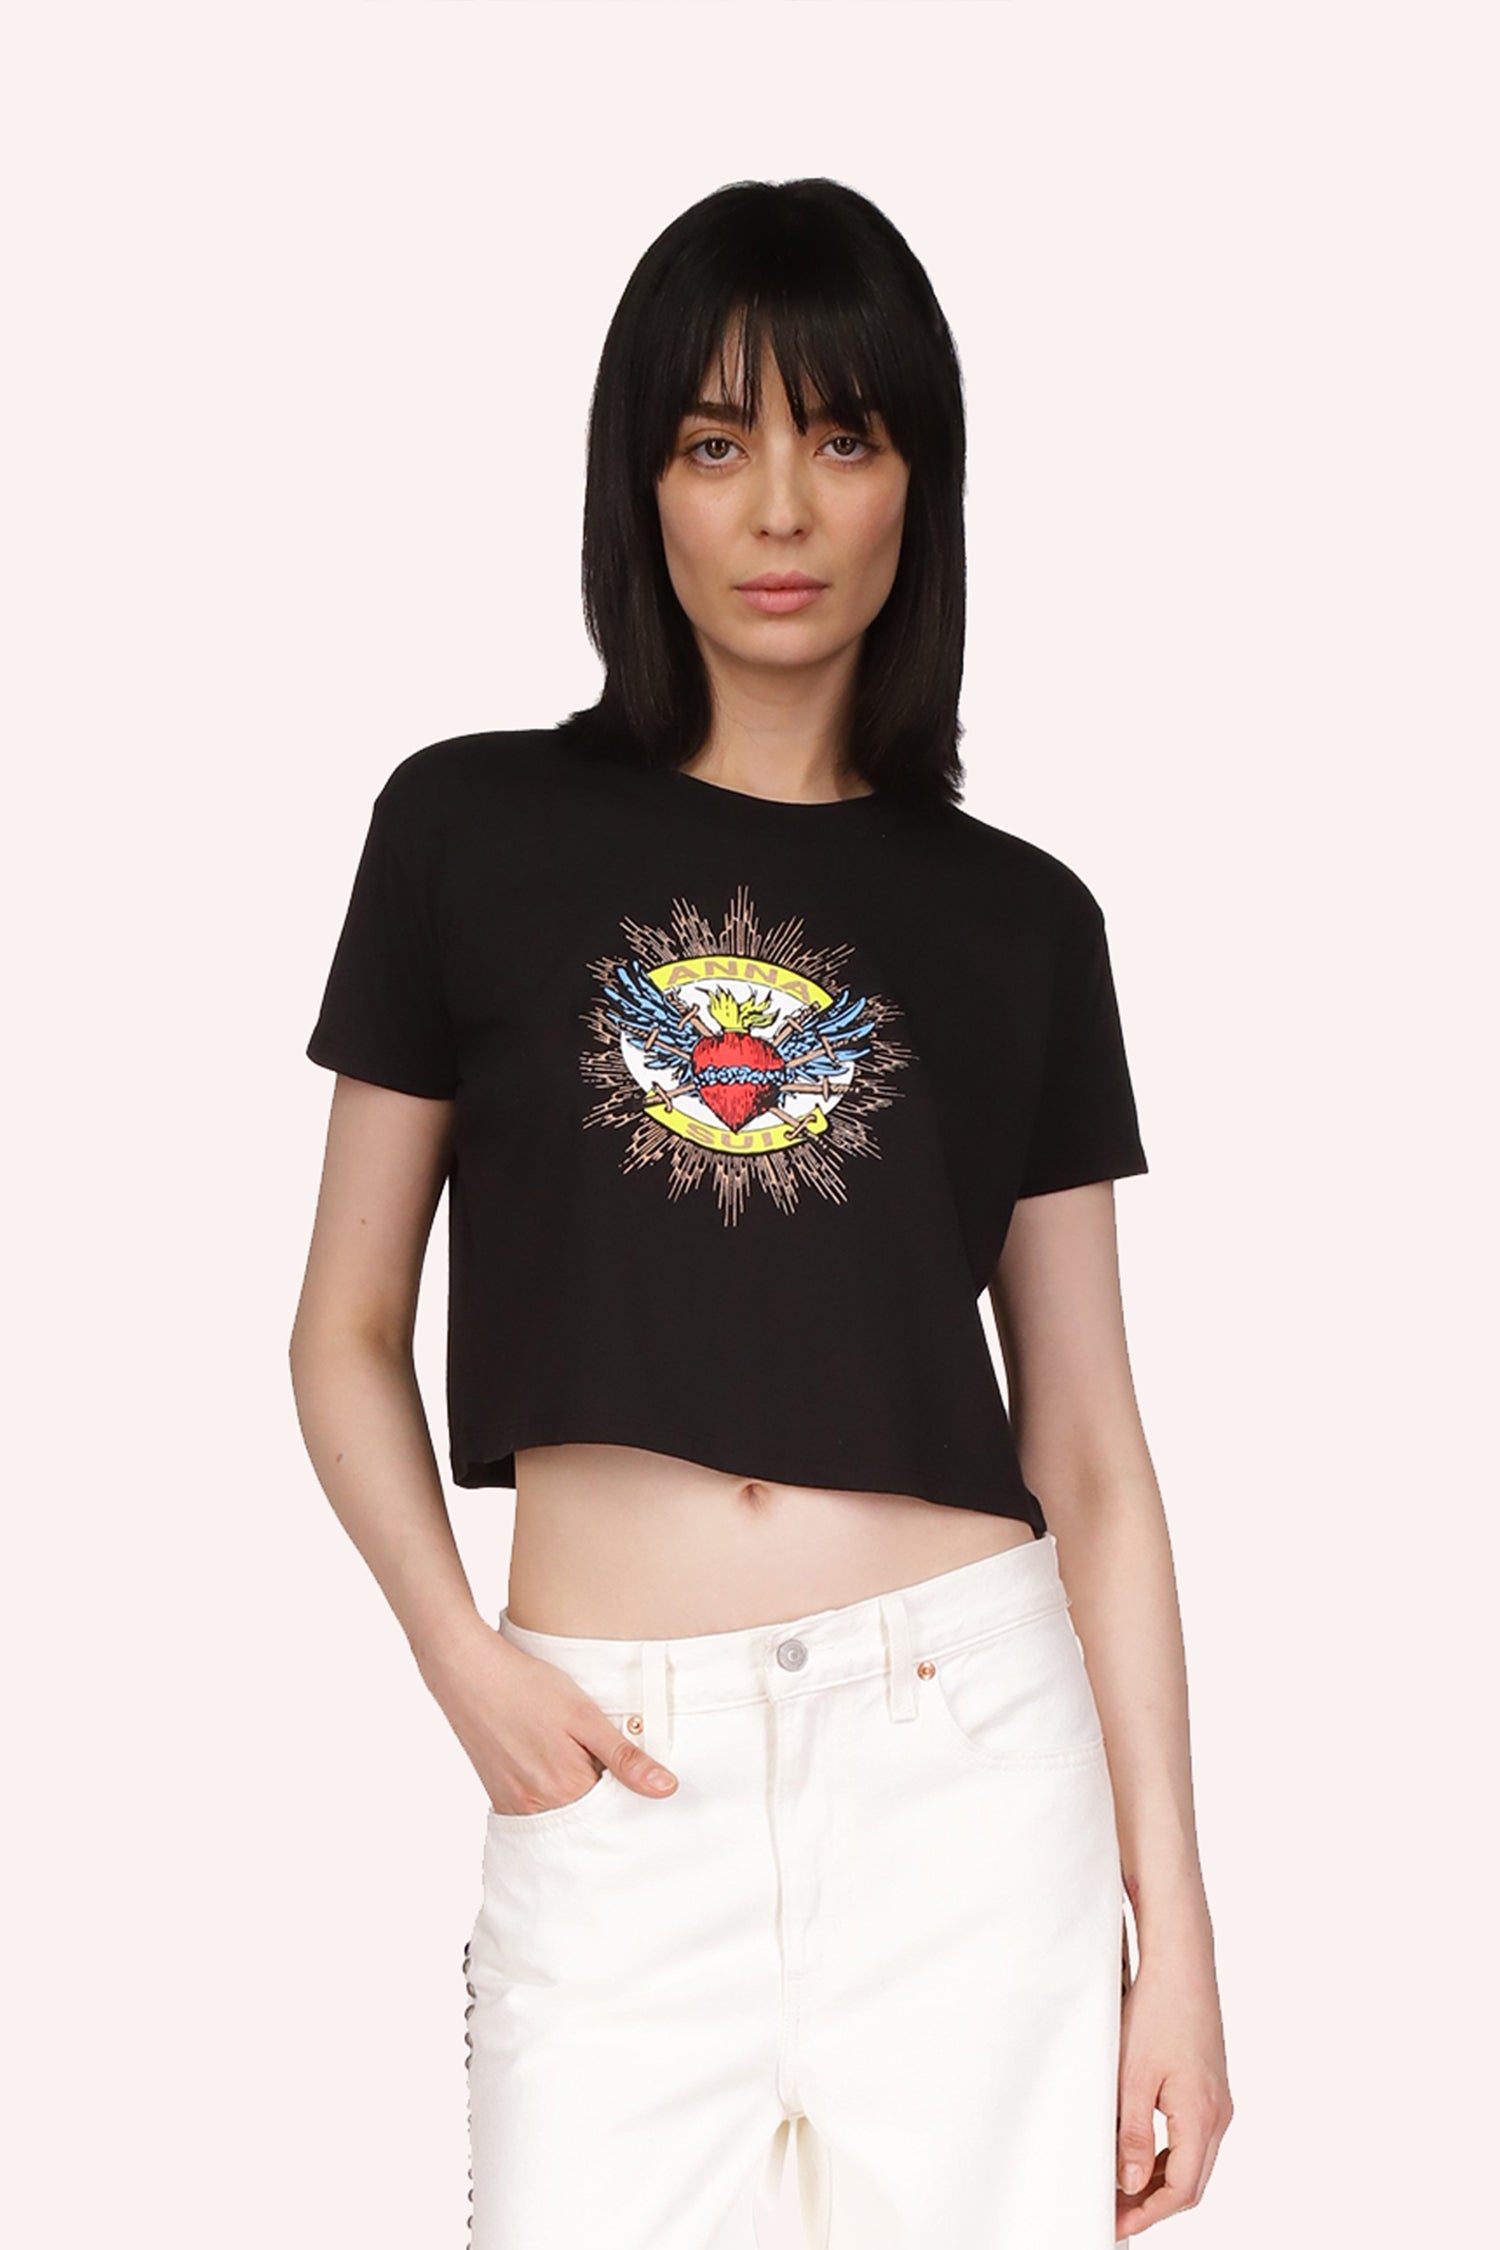 The Anna Sui Sacred Heart Cropped T-Shirt in Black Multi is a short-sleeved t-shirt, which ends above the belly button